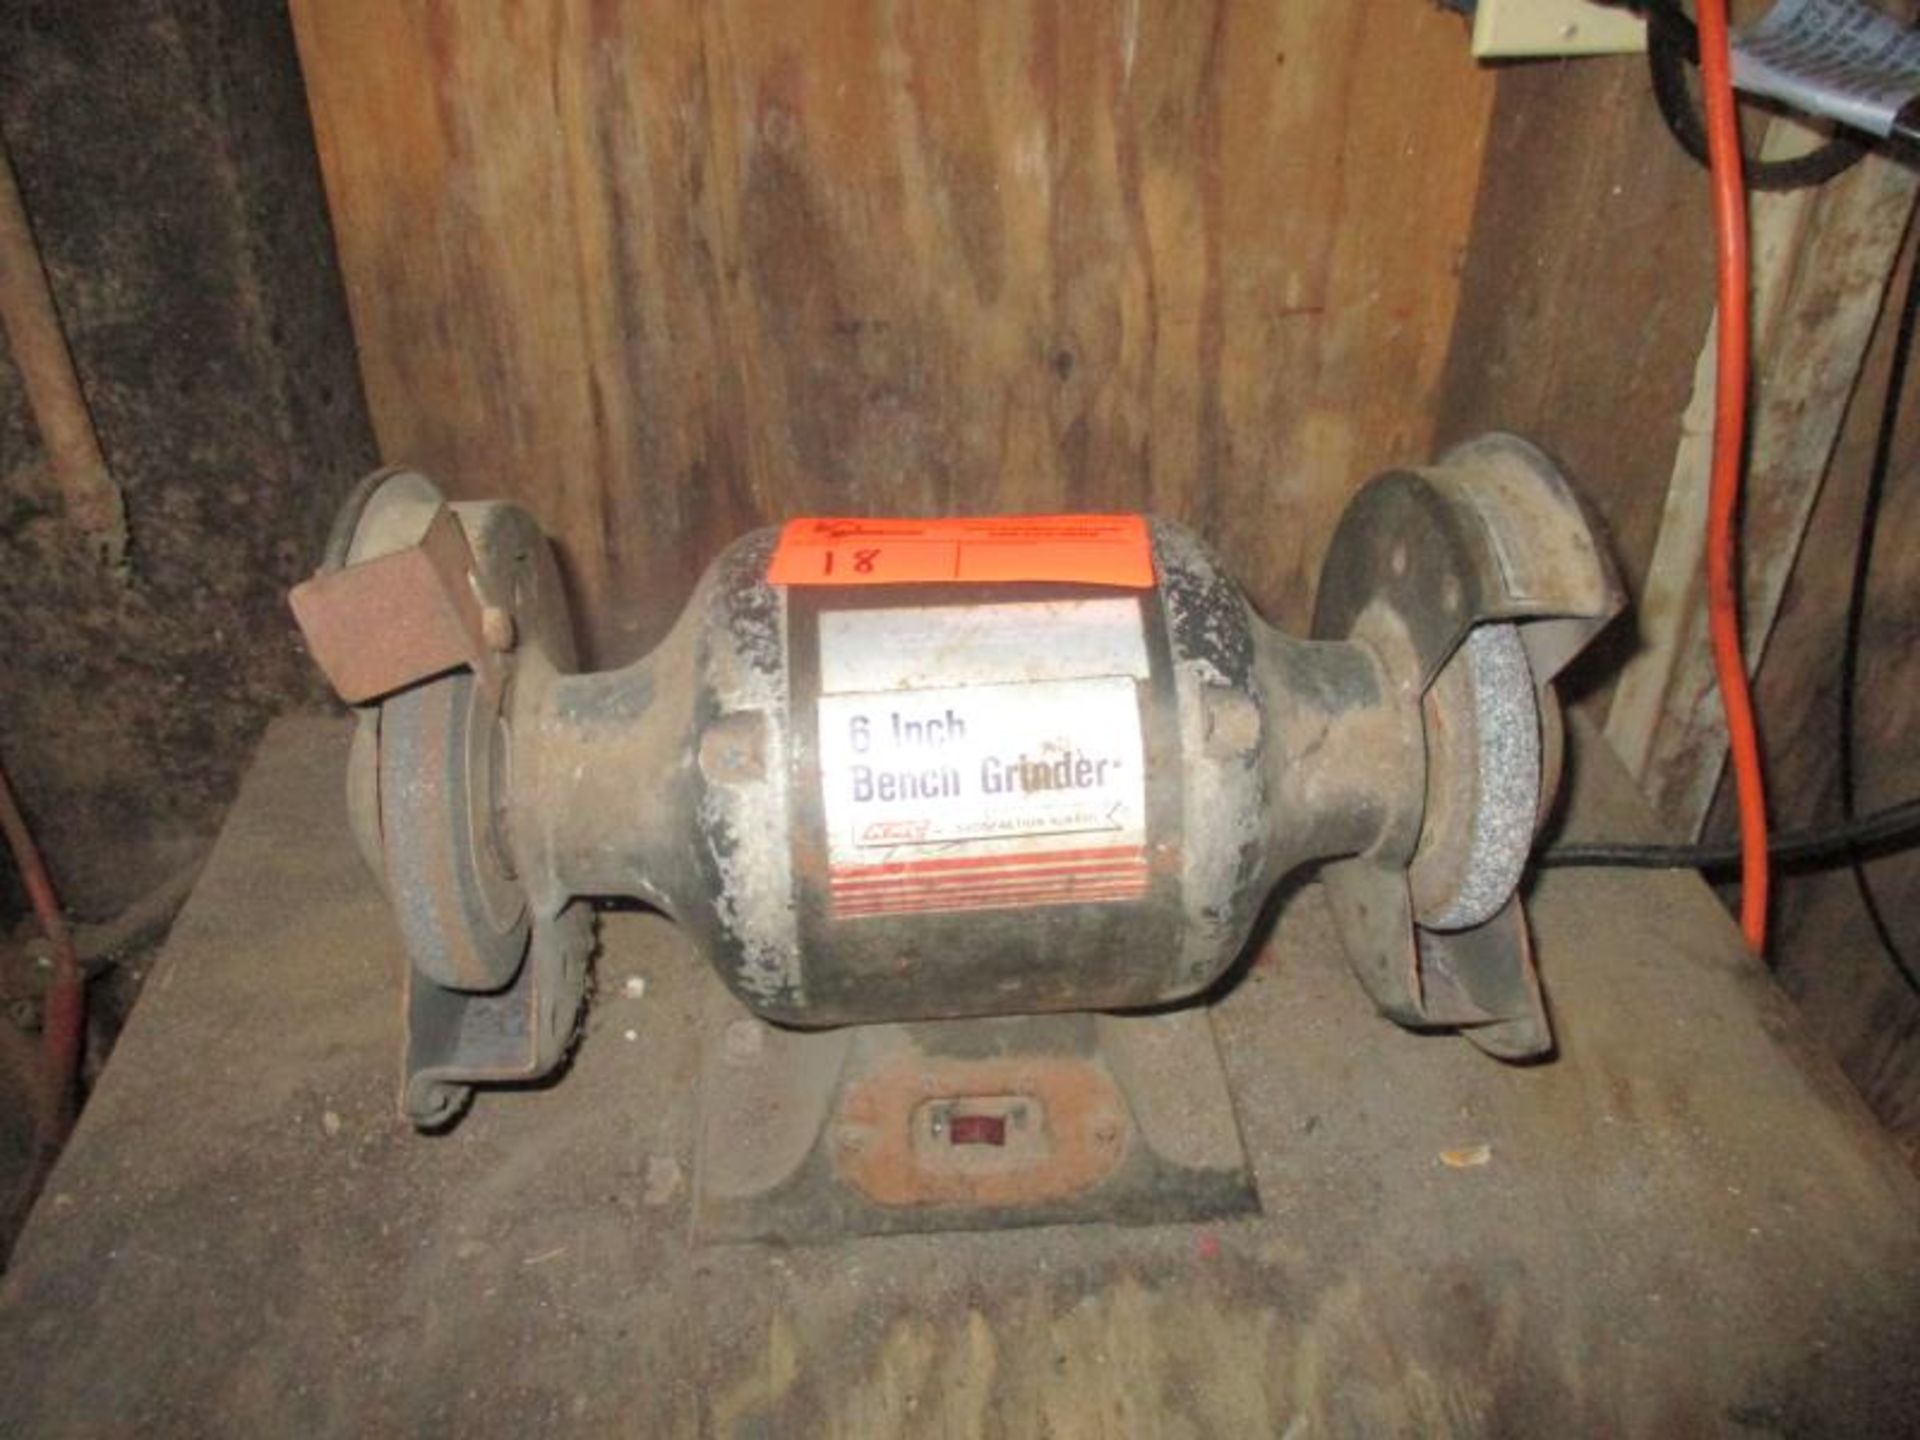 6" Double End Bench Grinder - Image 2 of 2